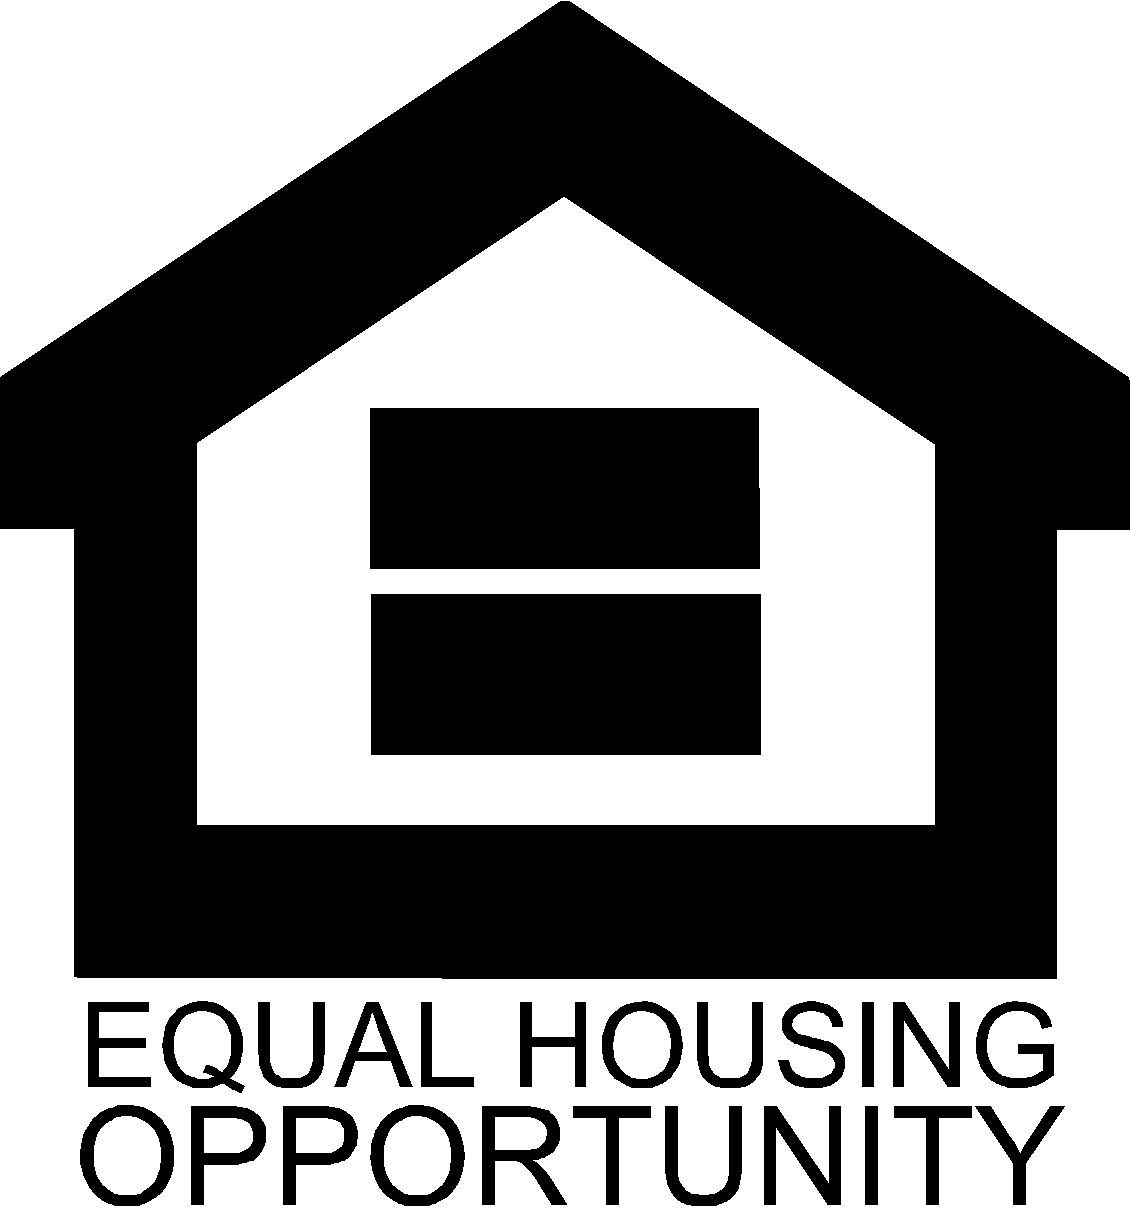 Equal opportunity housing logo